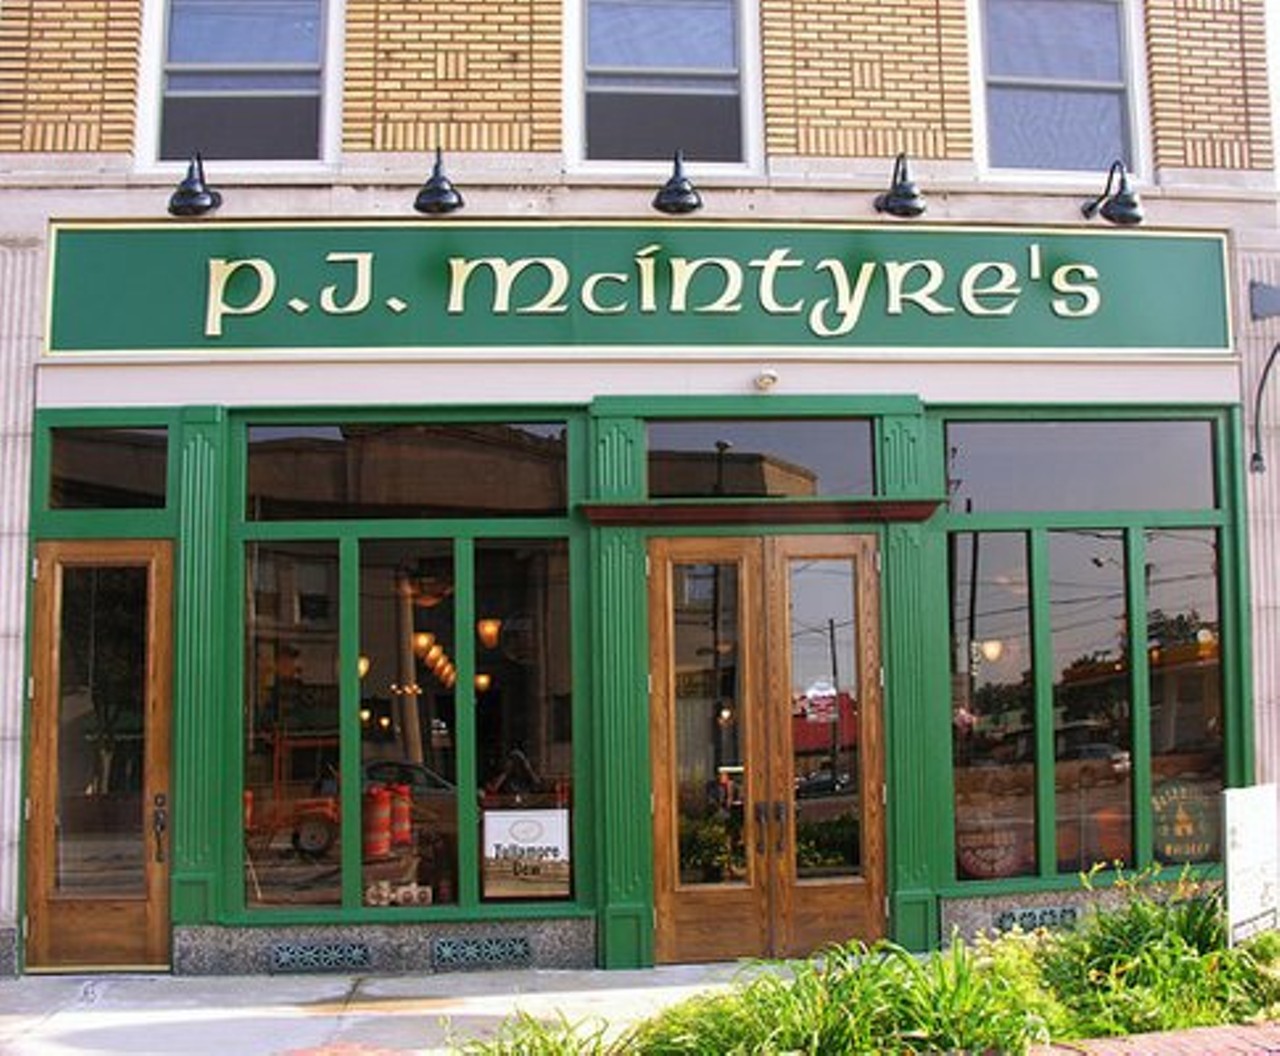  PJ McIntyre's Irish Pub
17119 Lorain Ave.
A beacon in the heart of the Irish-inspired neighborhood of West Park, PJ McIntyre's sets the standard for a St. Pat's Day experience with the perfect pint of Guinness. 
Photo via Yelp/Cara L.